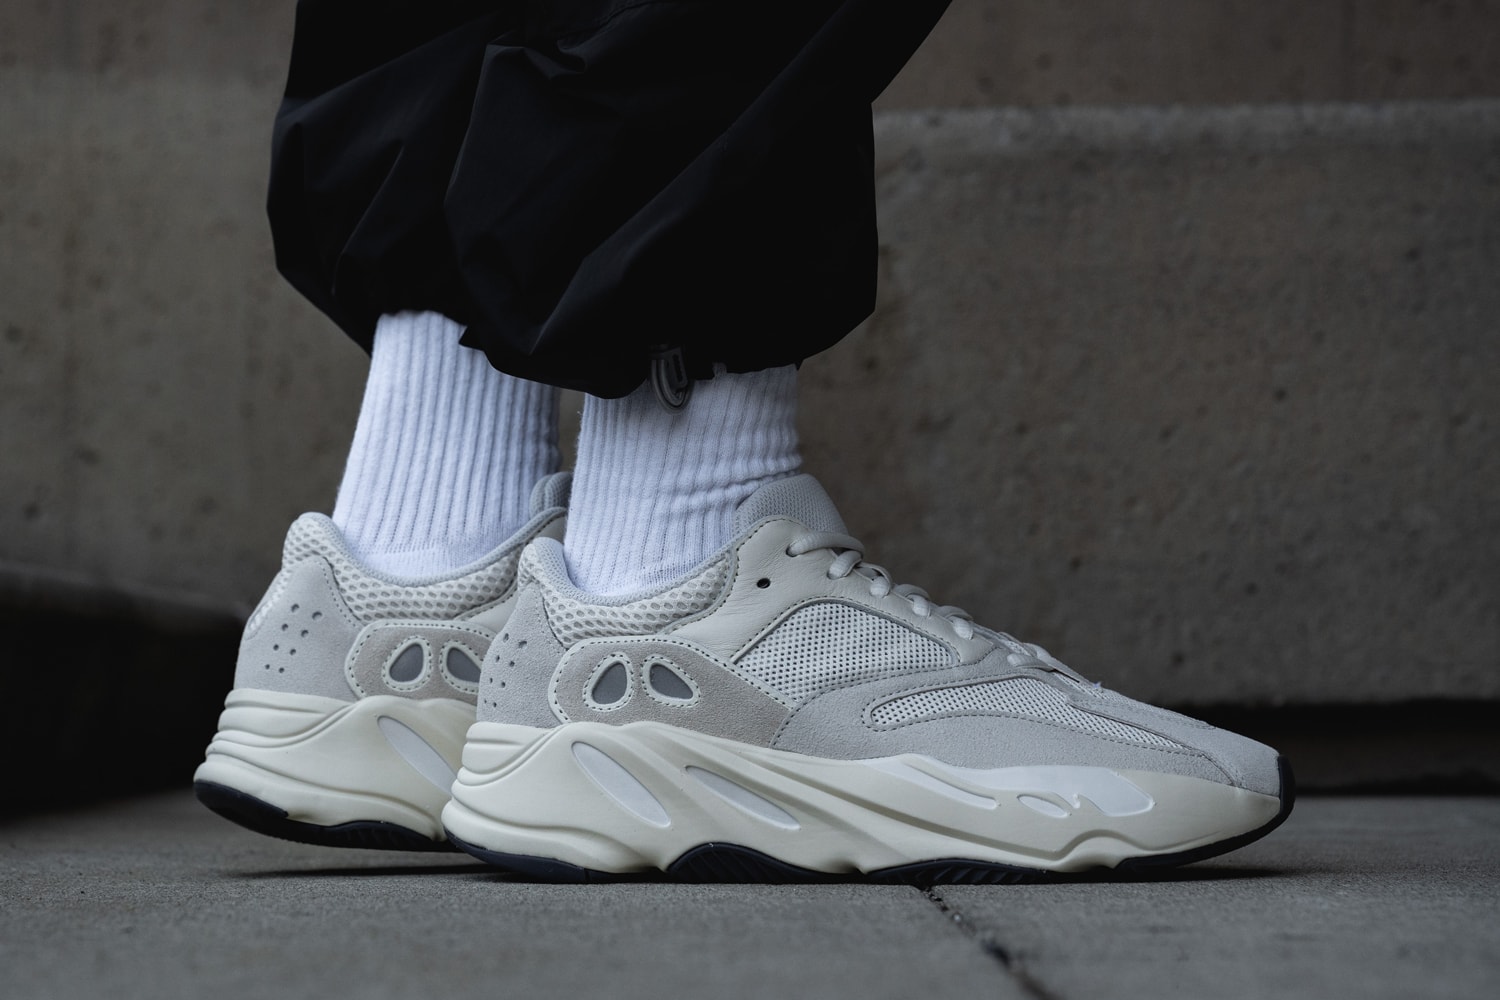 mangfoldighed Instrument Forhandle adidas YEEZY BOOST 700 "Analog" On-Foot Look | Hypebeast